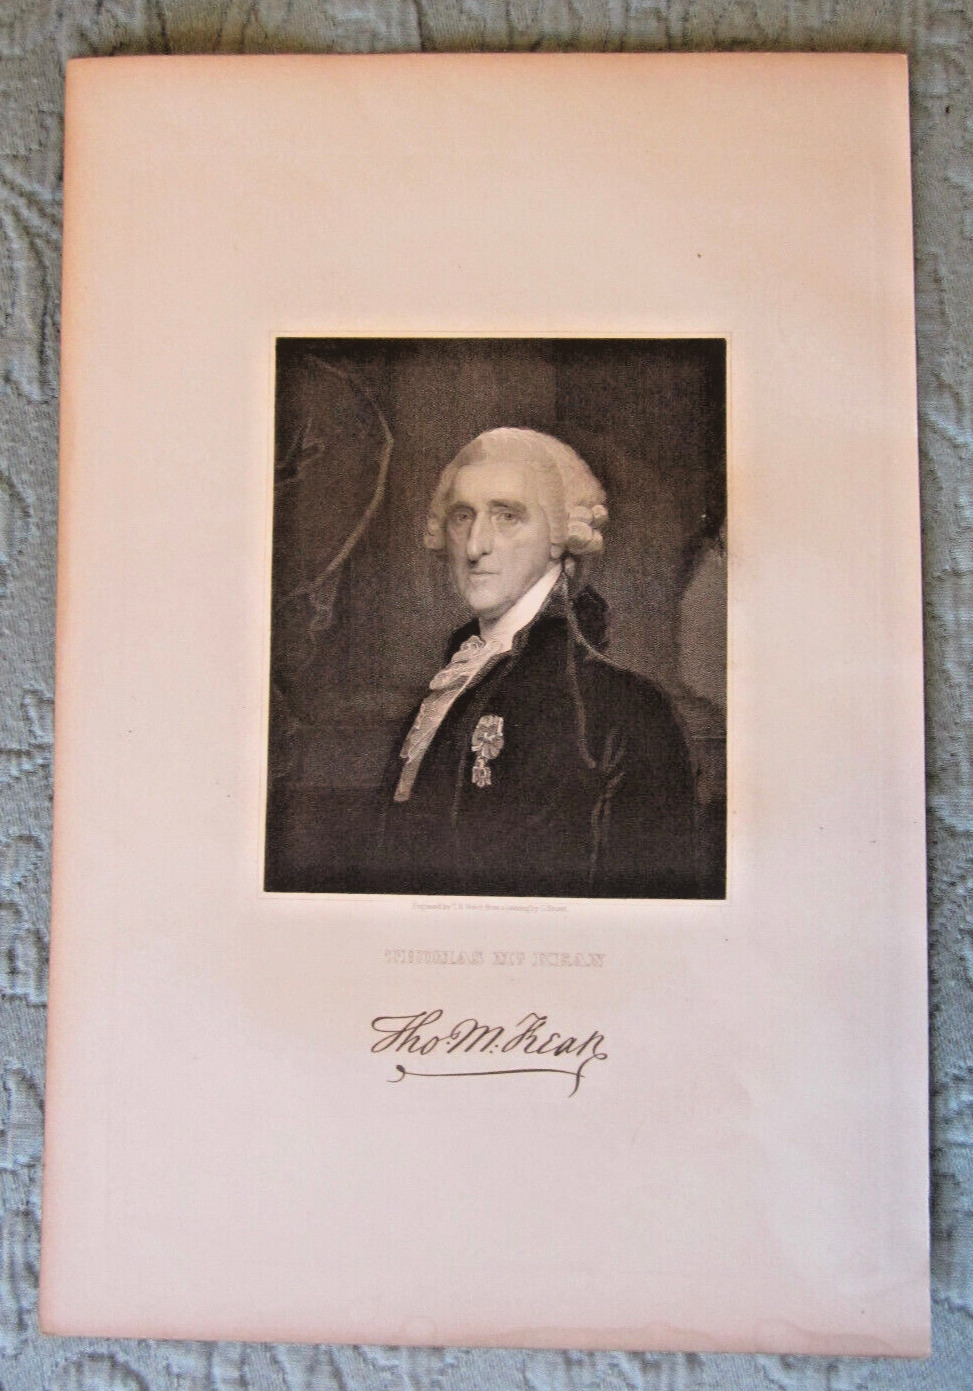 Engraving of Thomas McKean, American Founding Father from G.Stuart Portrait